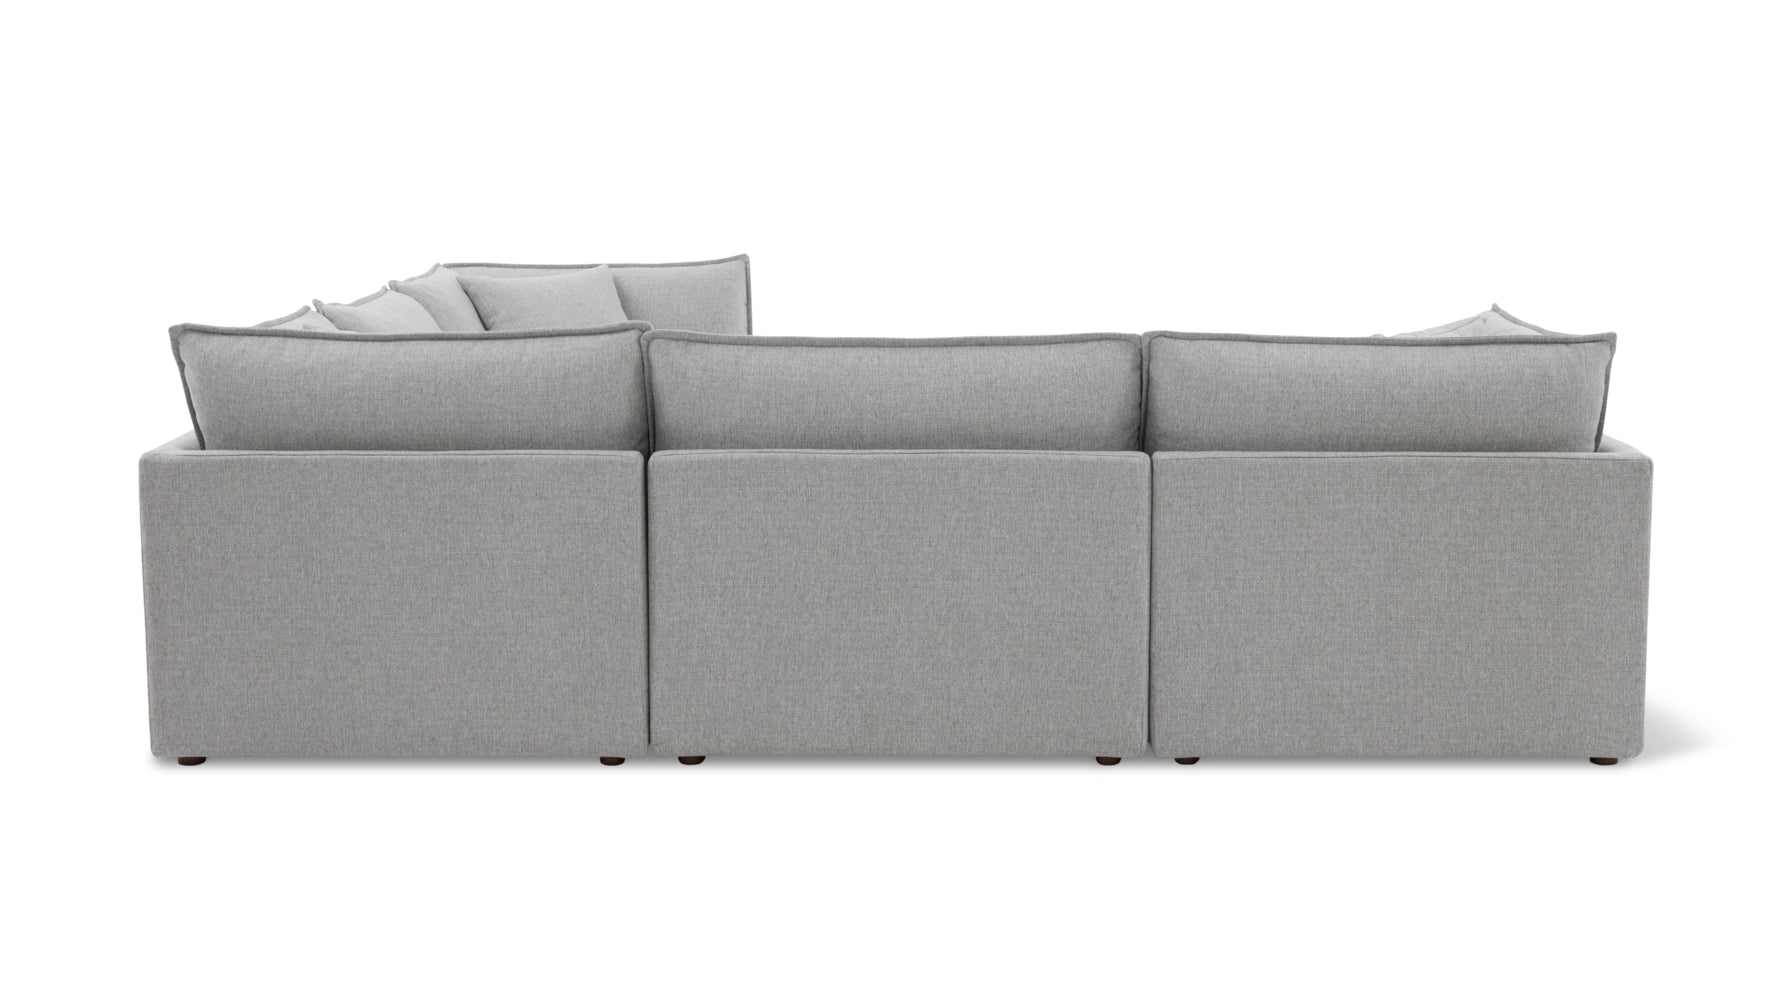 Chill Time 5-Piece Modular Sectional Closed, Heather - Image 4